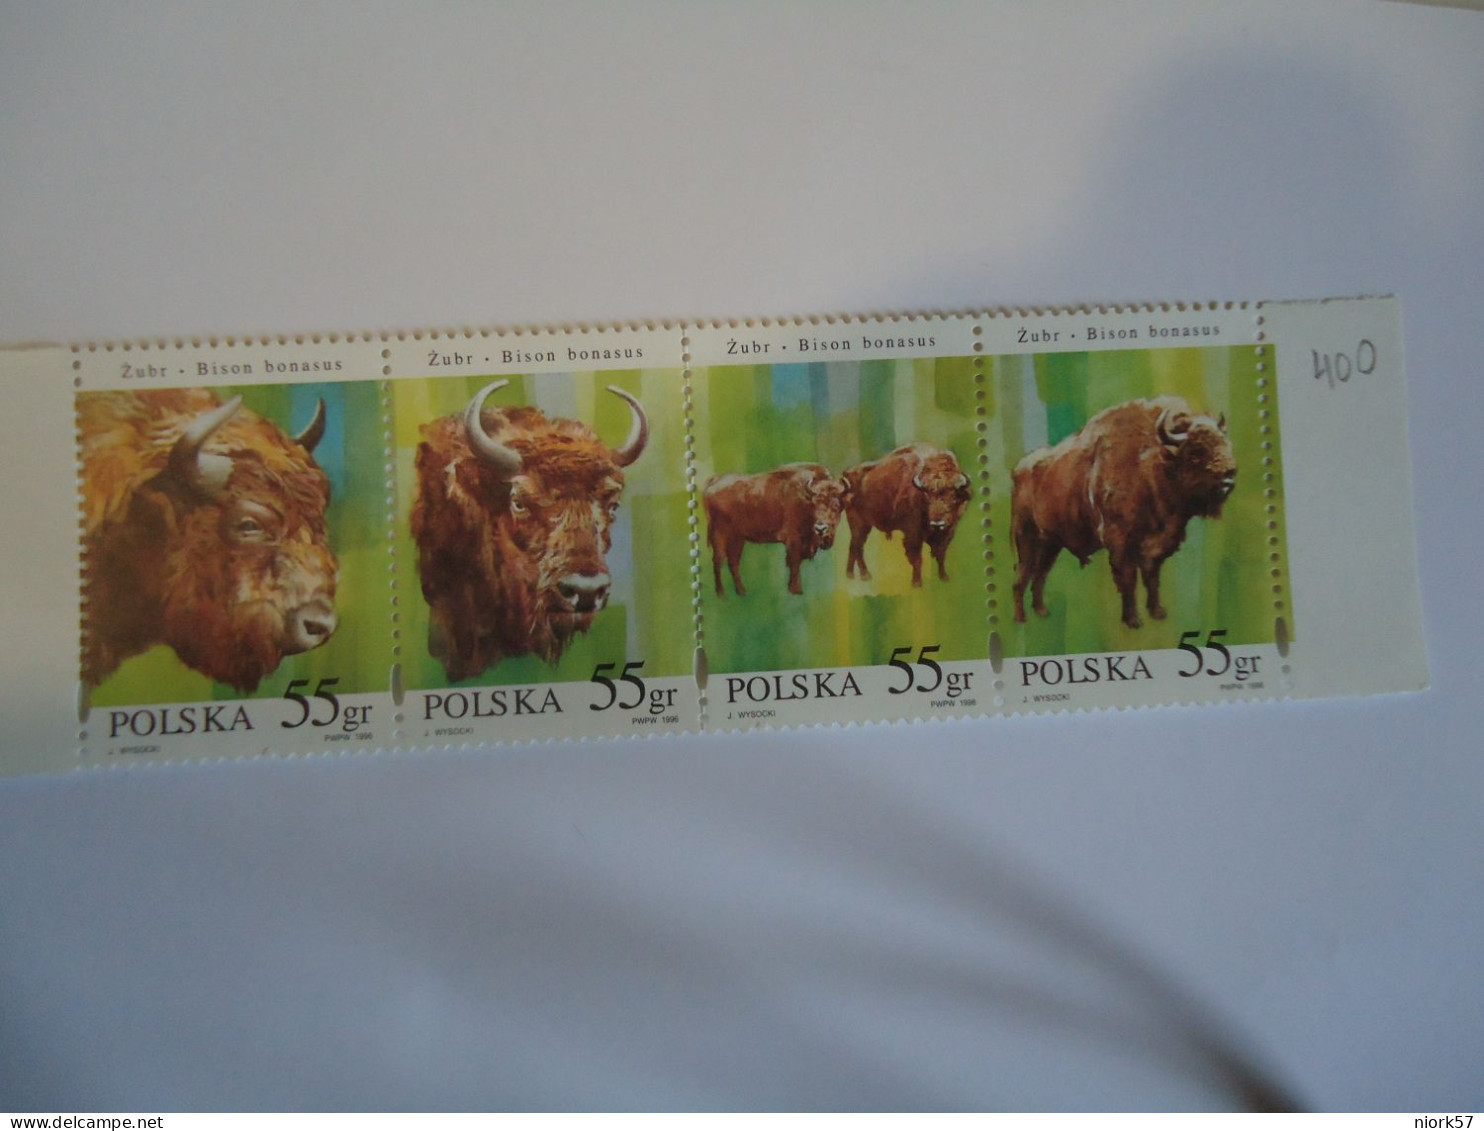 POLAND MNH  STAMPS SE TENANT4 ANIMALS  BISON  1996 - Vaches